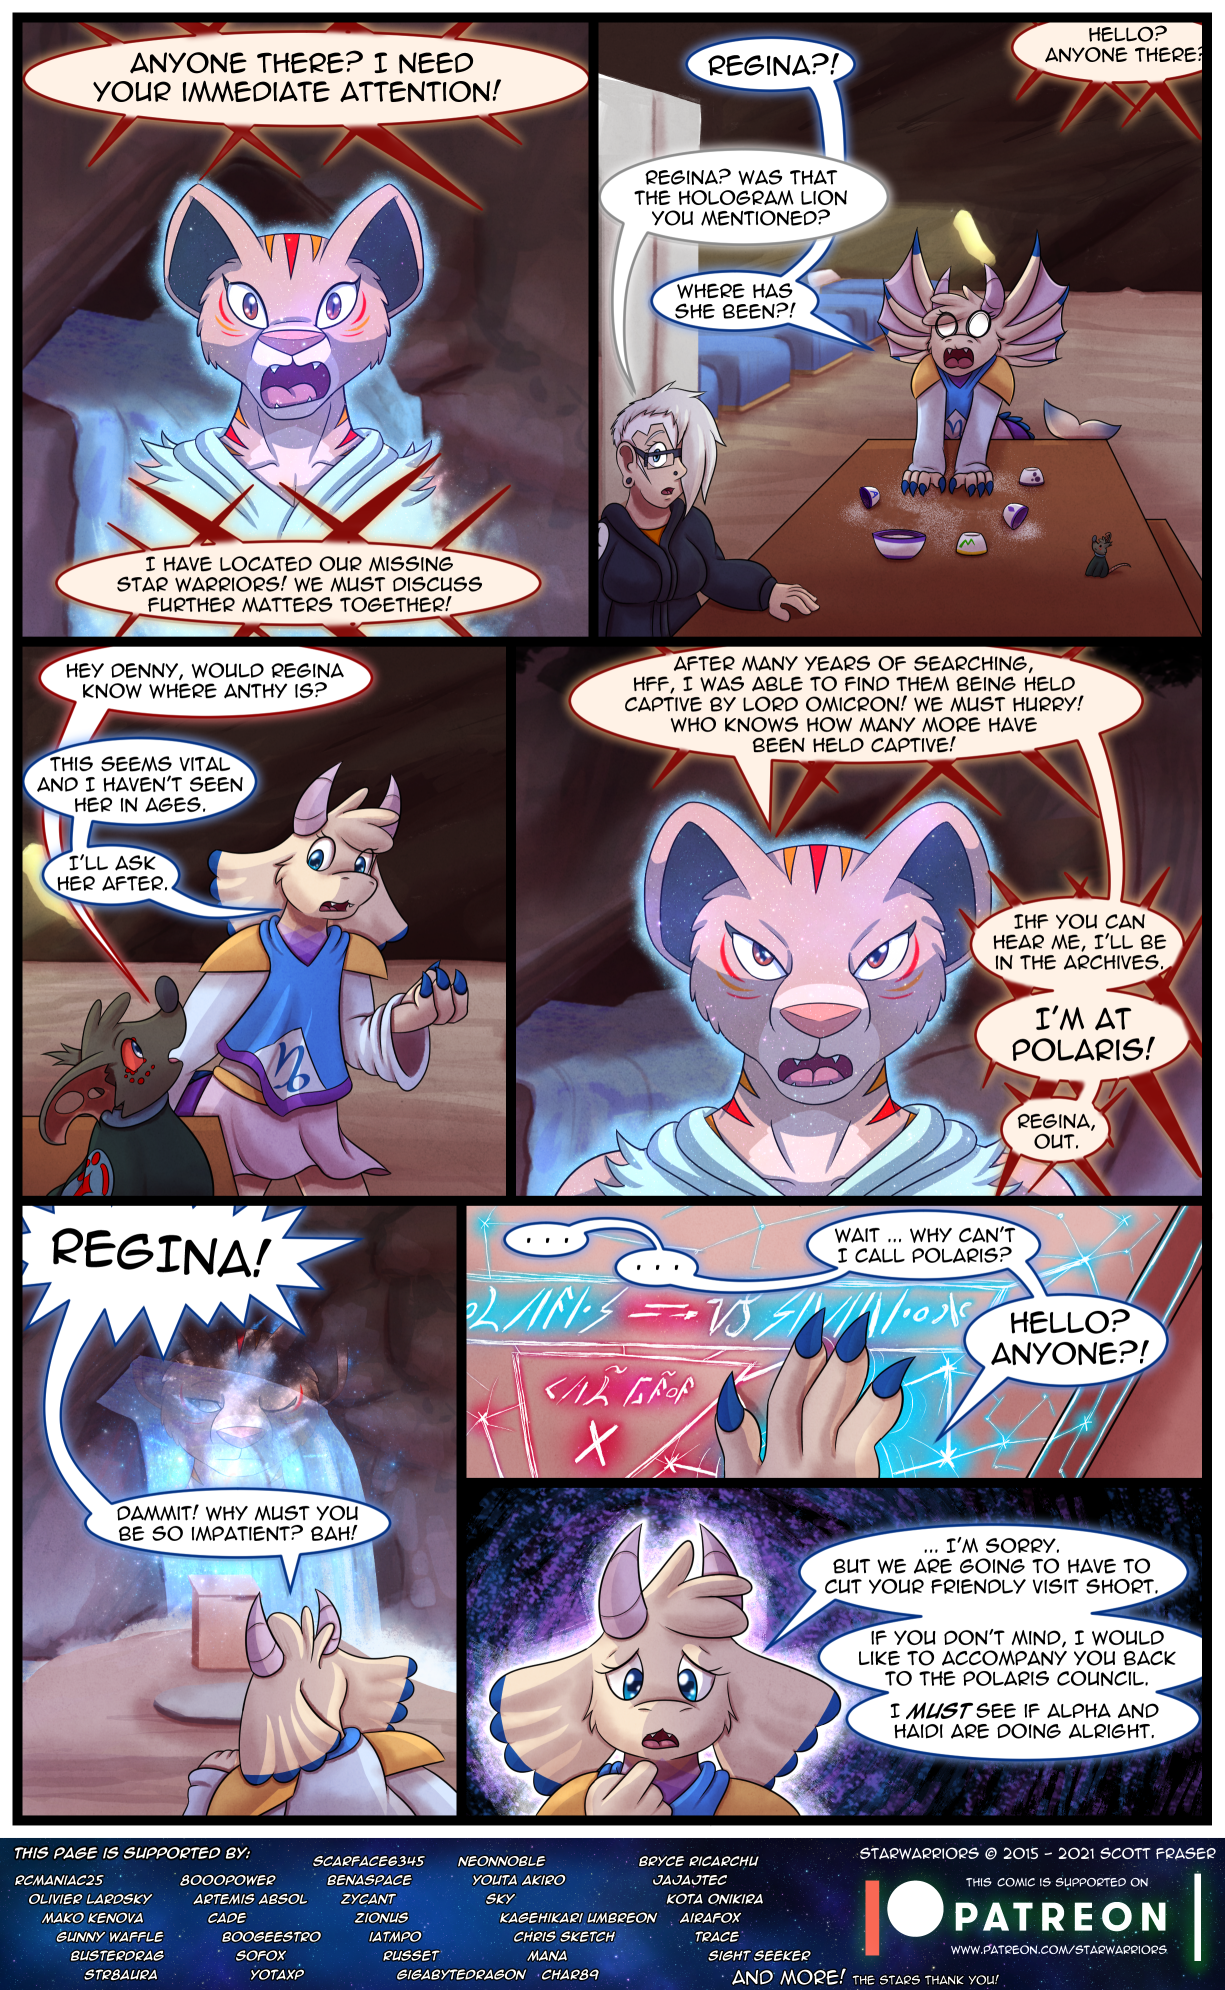 Ch6 Page 1 – Anyone there?